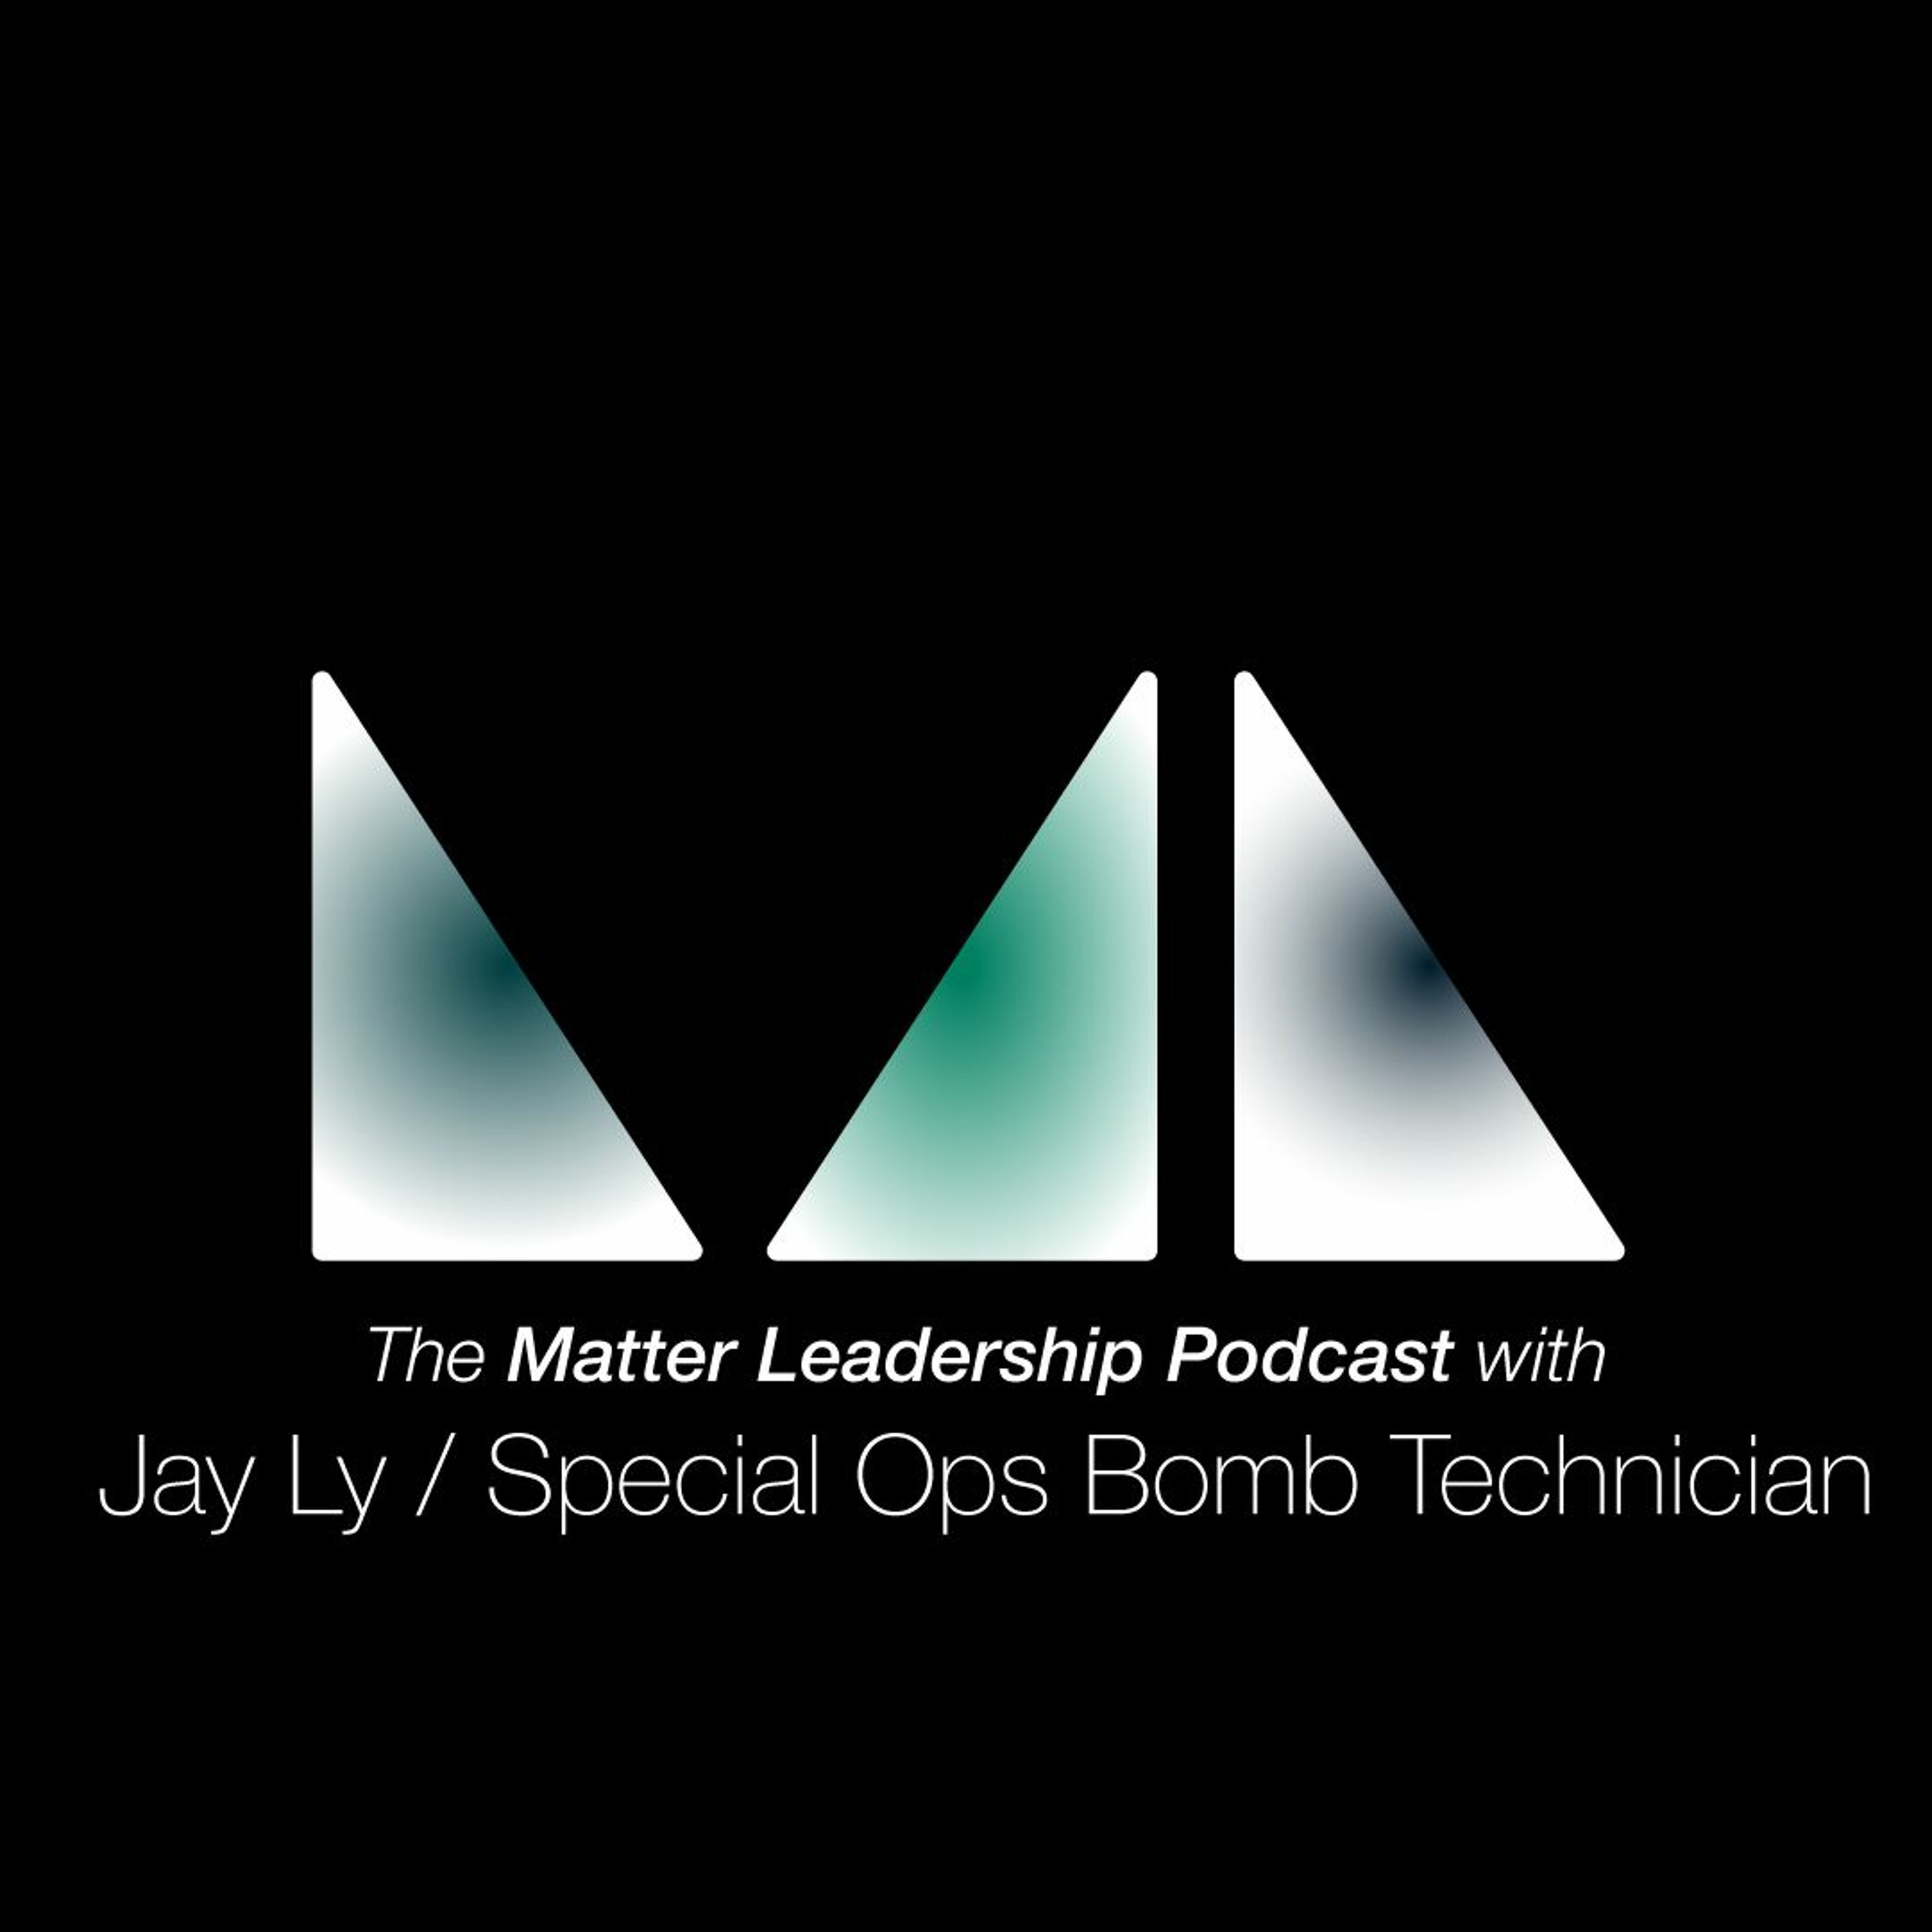 The Matter Leadership Podcast: Jay Ly / Special Operations Bomb Technician + Finance Coach